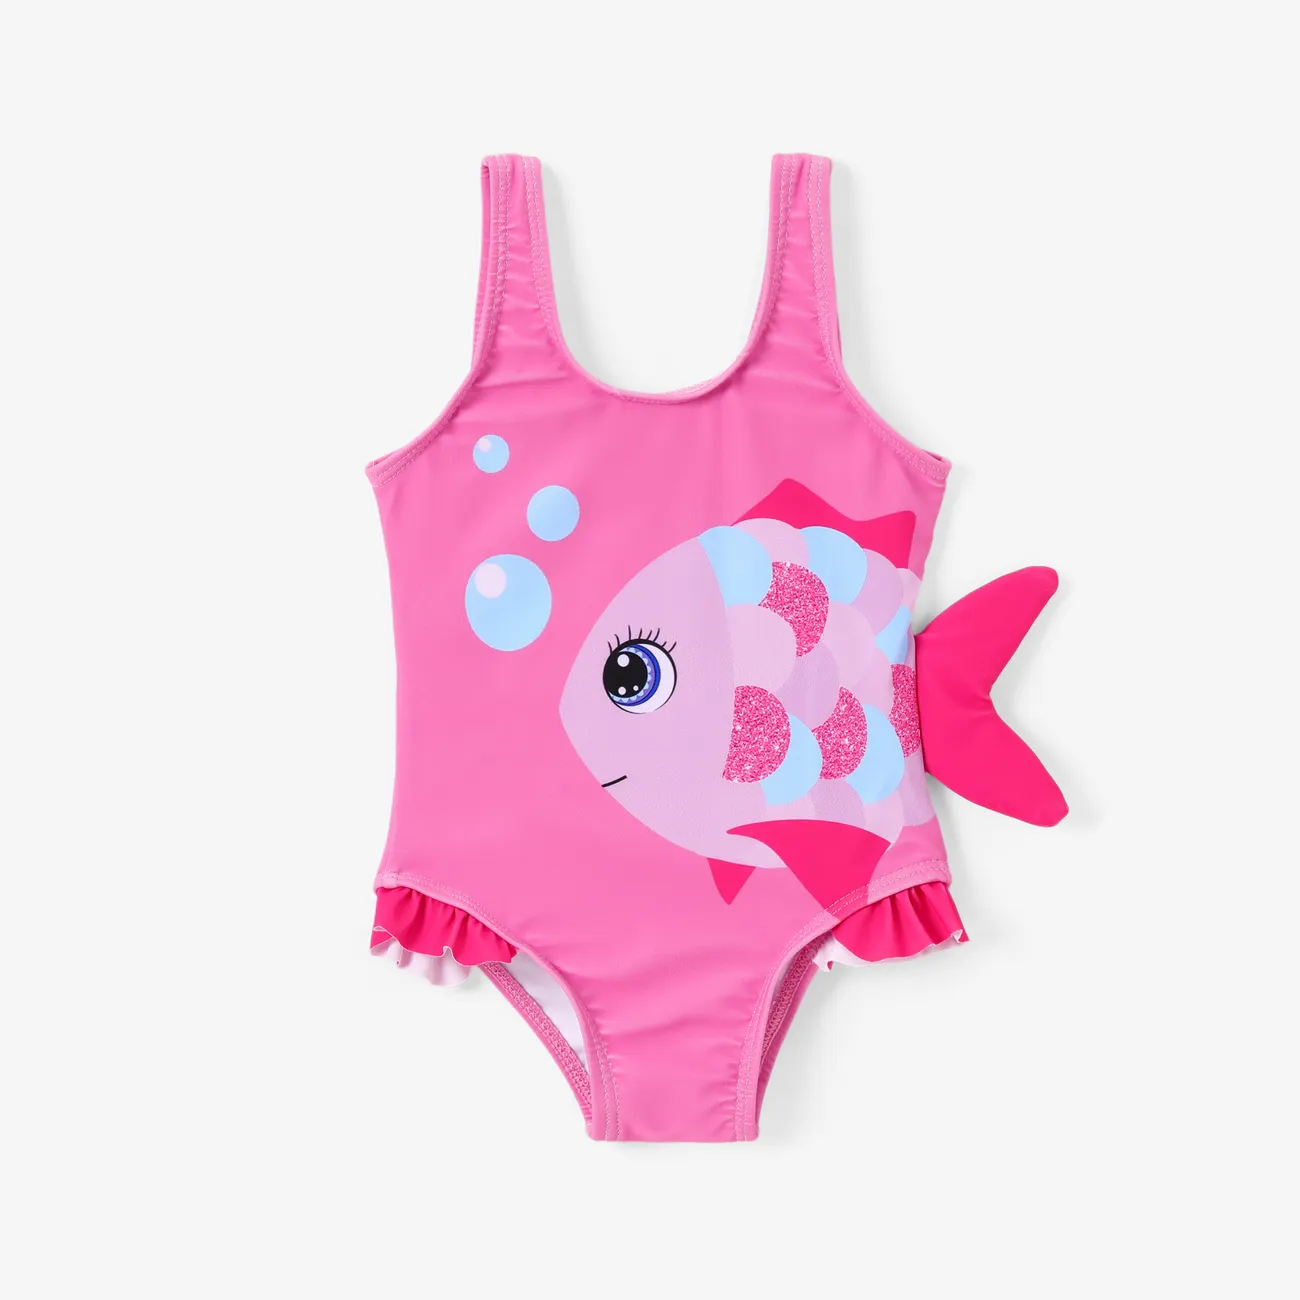 Baby Girl's Childlike Animal Pattern Swimsuit with Hanging Strap Pink big image 1